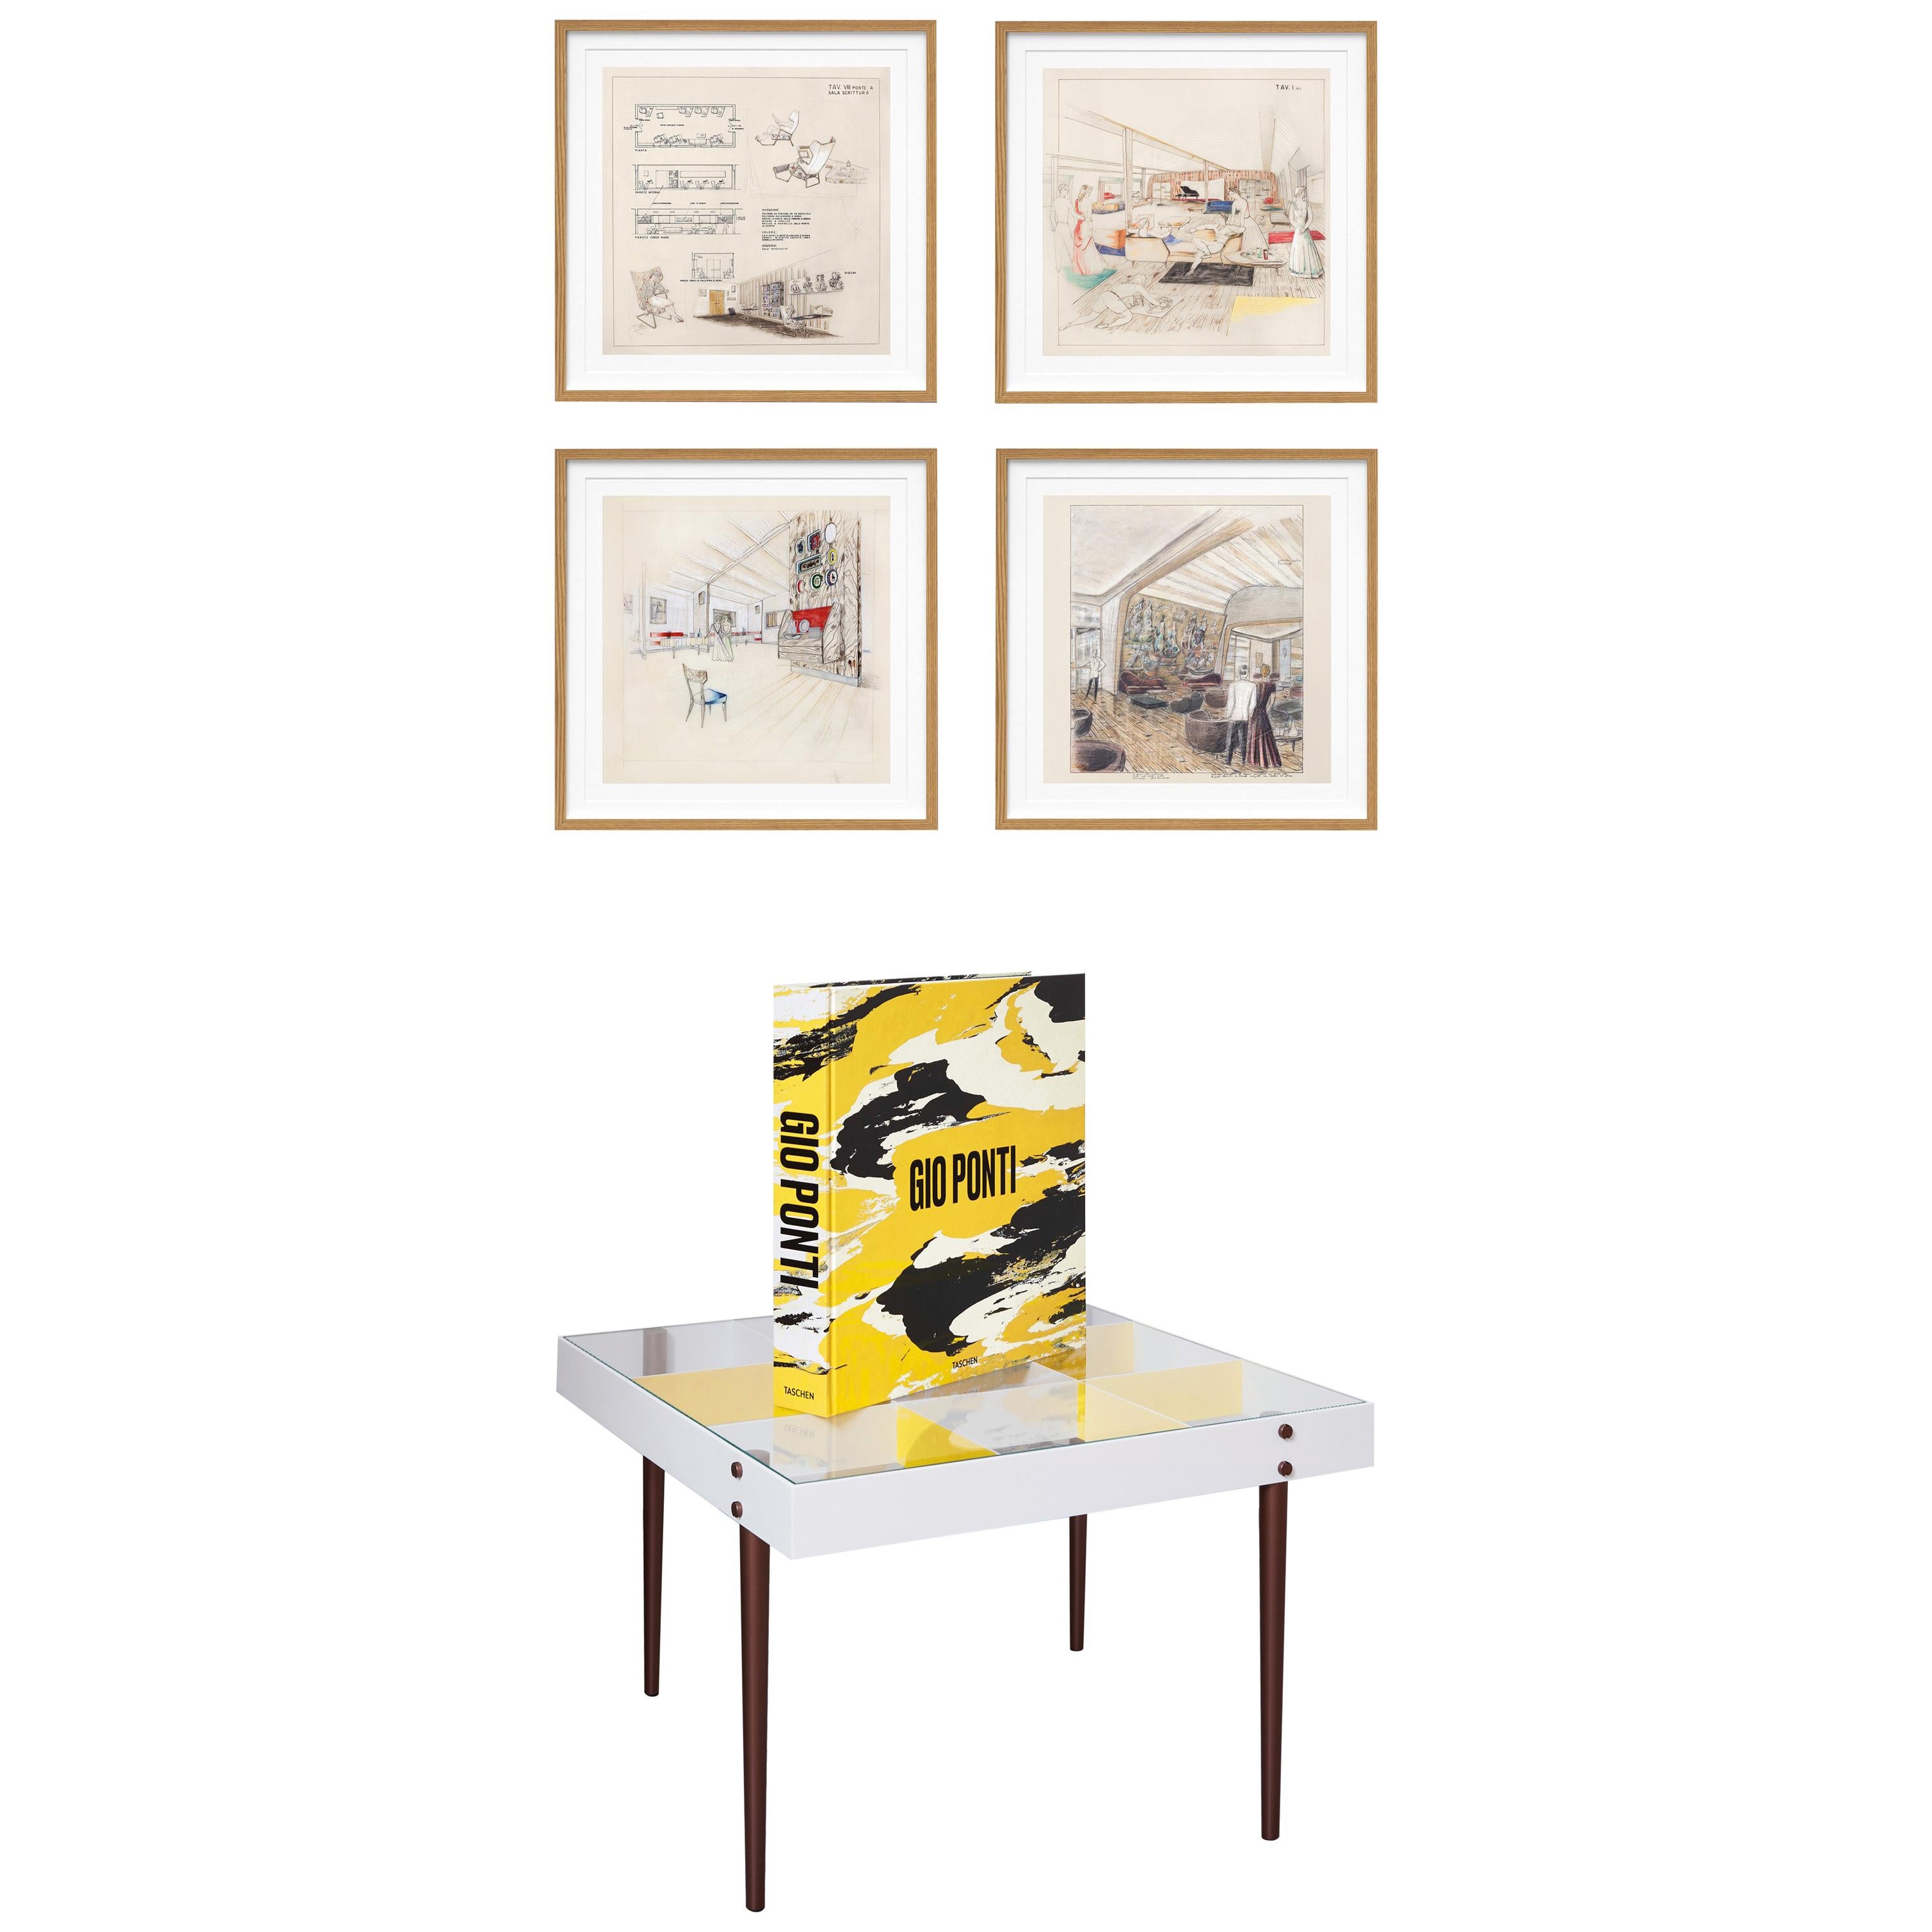 Gio Ponti, Art Edition, the Planchart Coffee Table and a Set of Four Art Prints